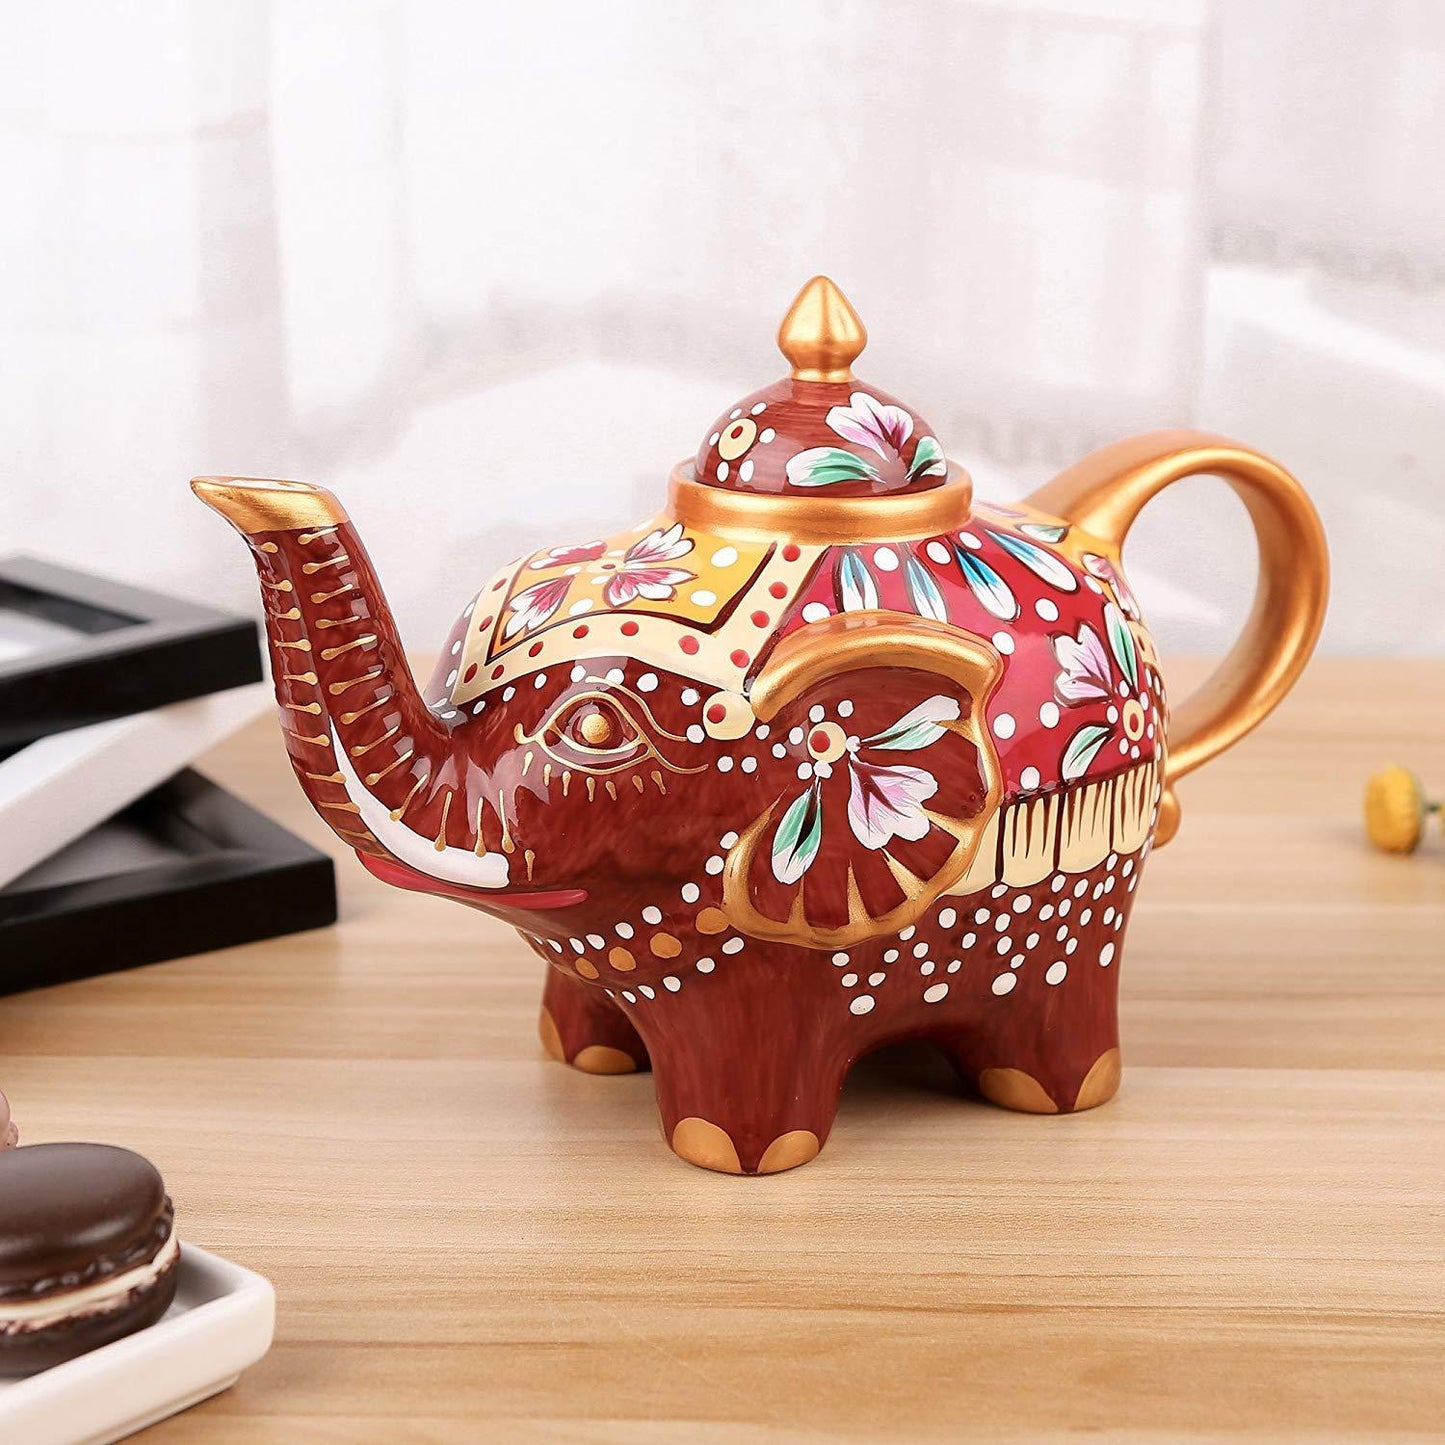 Porcelain Hand Painted Multicolor Elephant Shape Teapots Crafts with Gift Box 800 ml - Nordic Side - 800, Artvigor, Box, Coffeepots, Crafts, Elephant, Fanily, Gift, Hand, ml, Multicolor, Offi